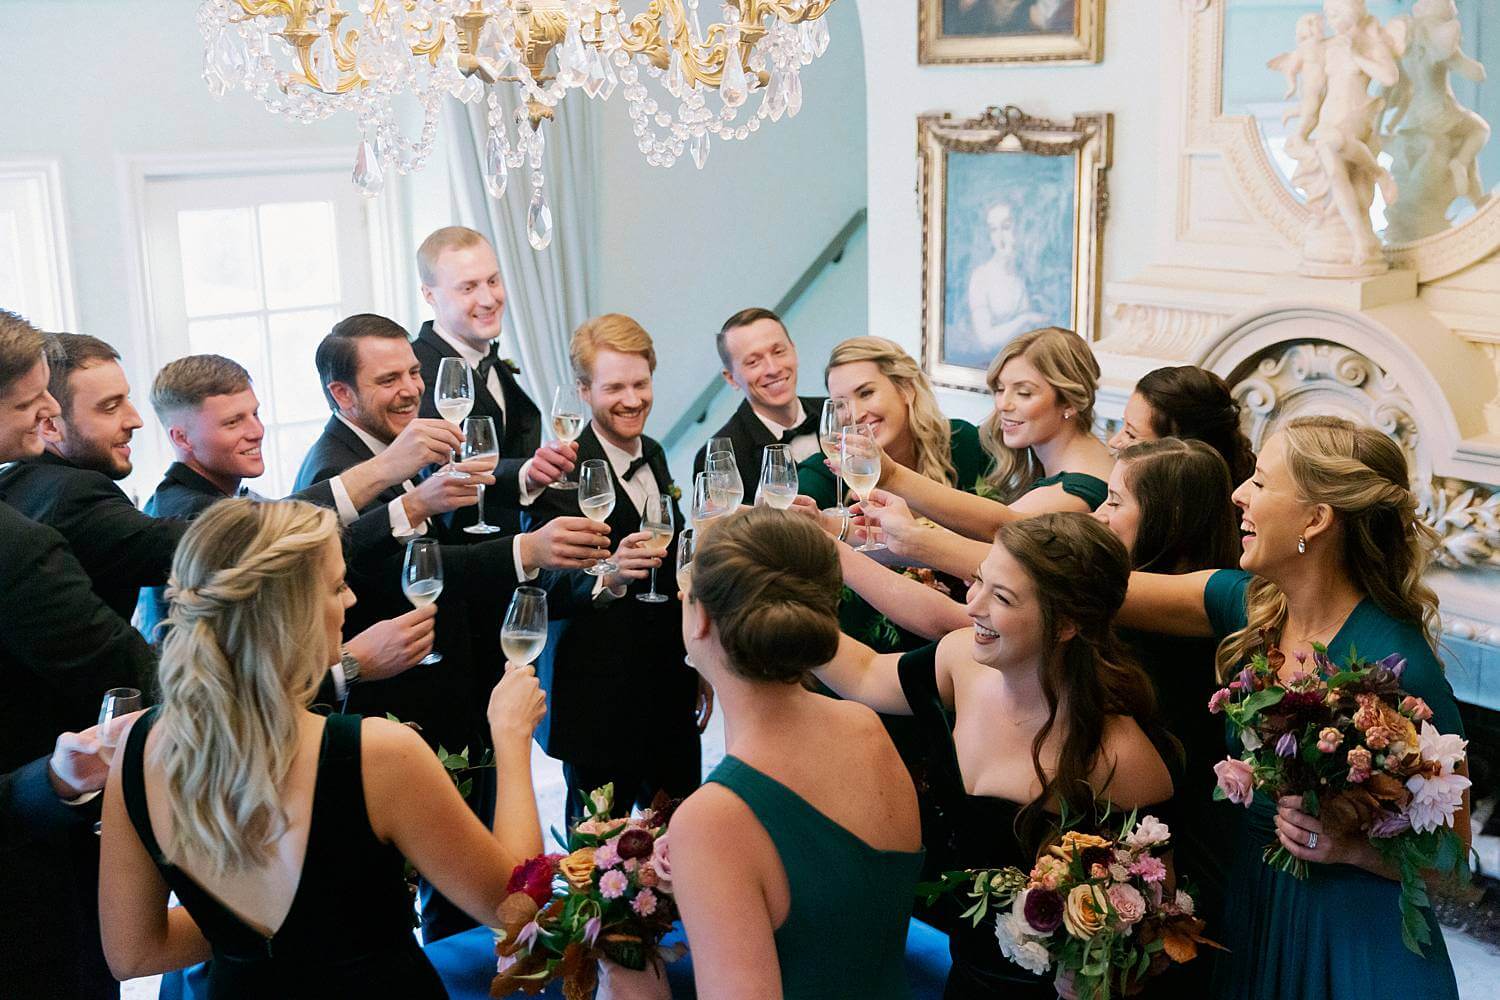 Bridal party celebrating just after the wedding at Dover Hall Estate